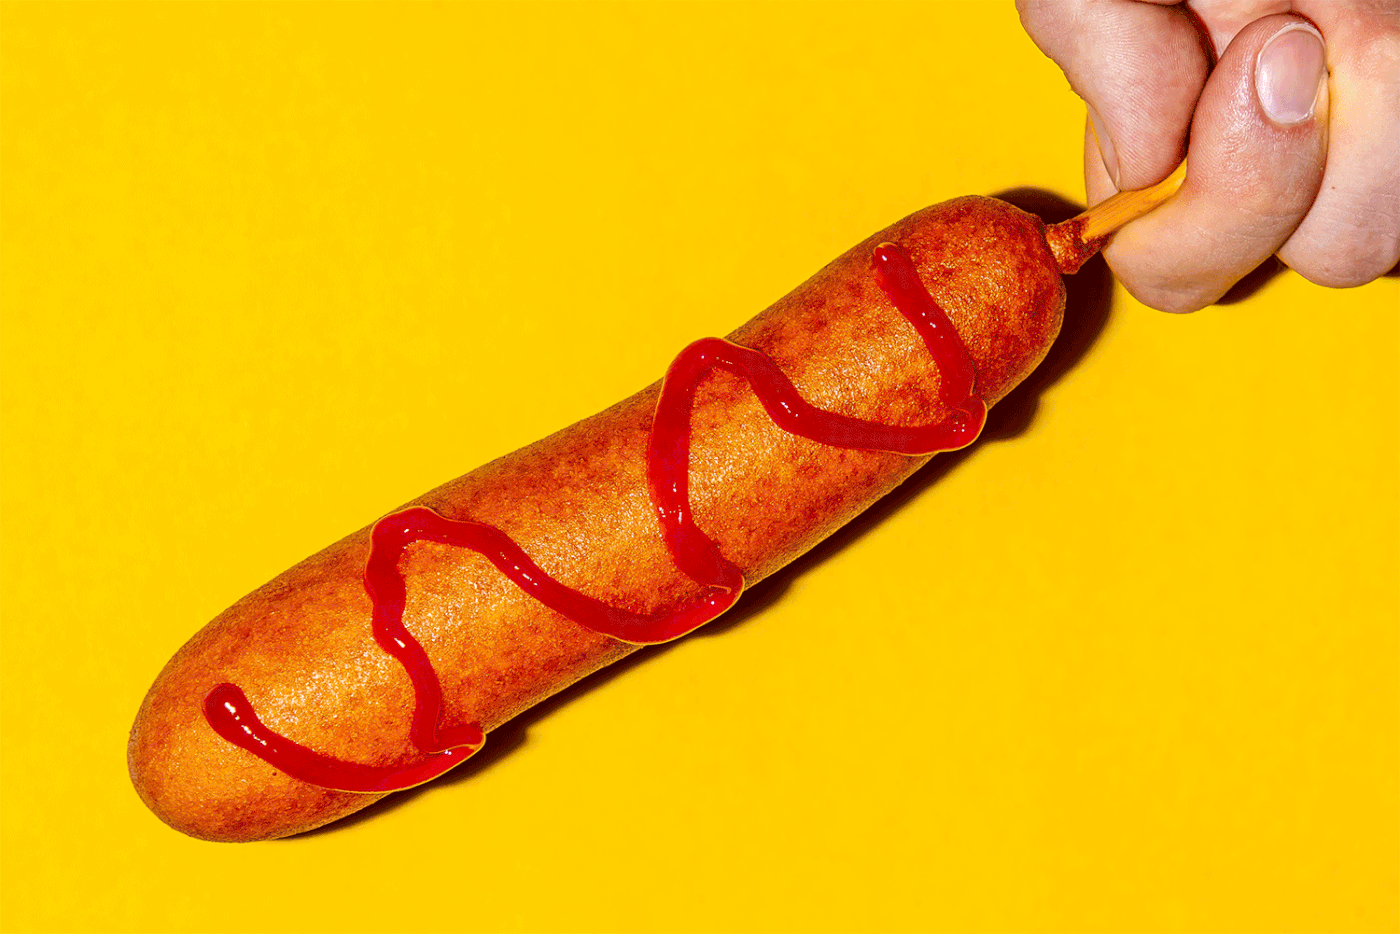 A corn dog against yellow background